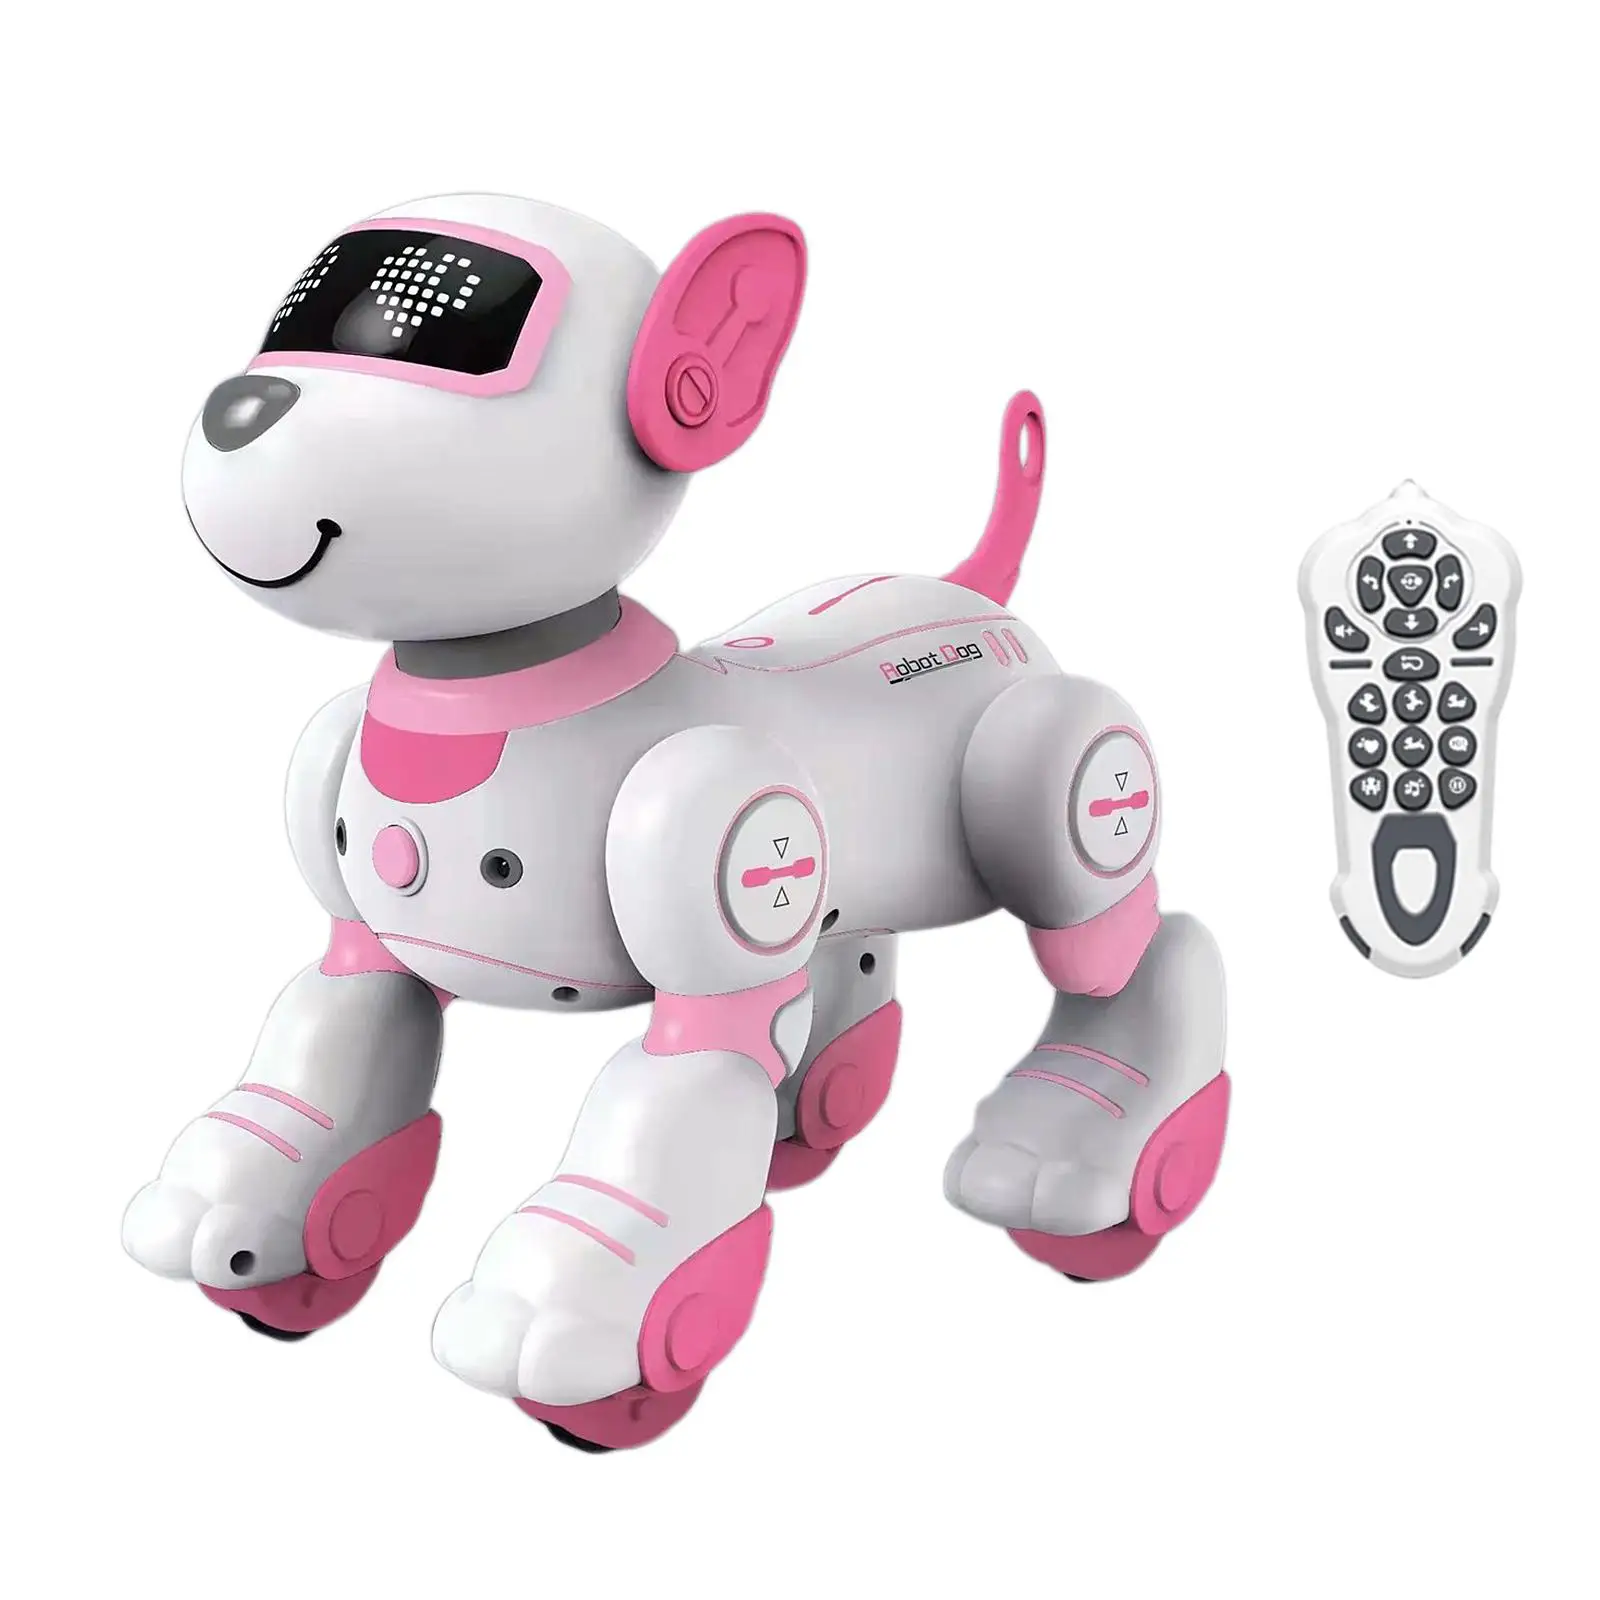 Remote Control Robot Dog Toy Toys Robotic Pet Toy for Birthday Gift